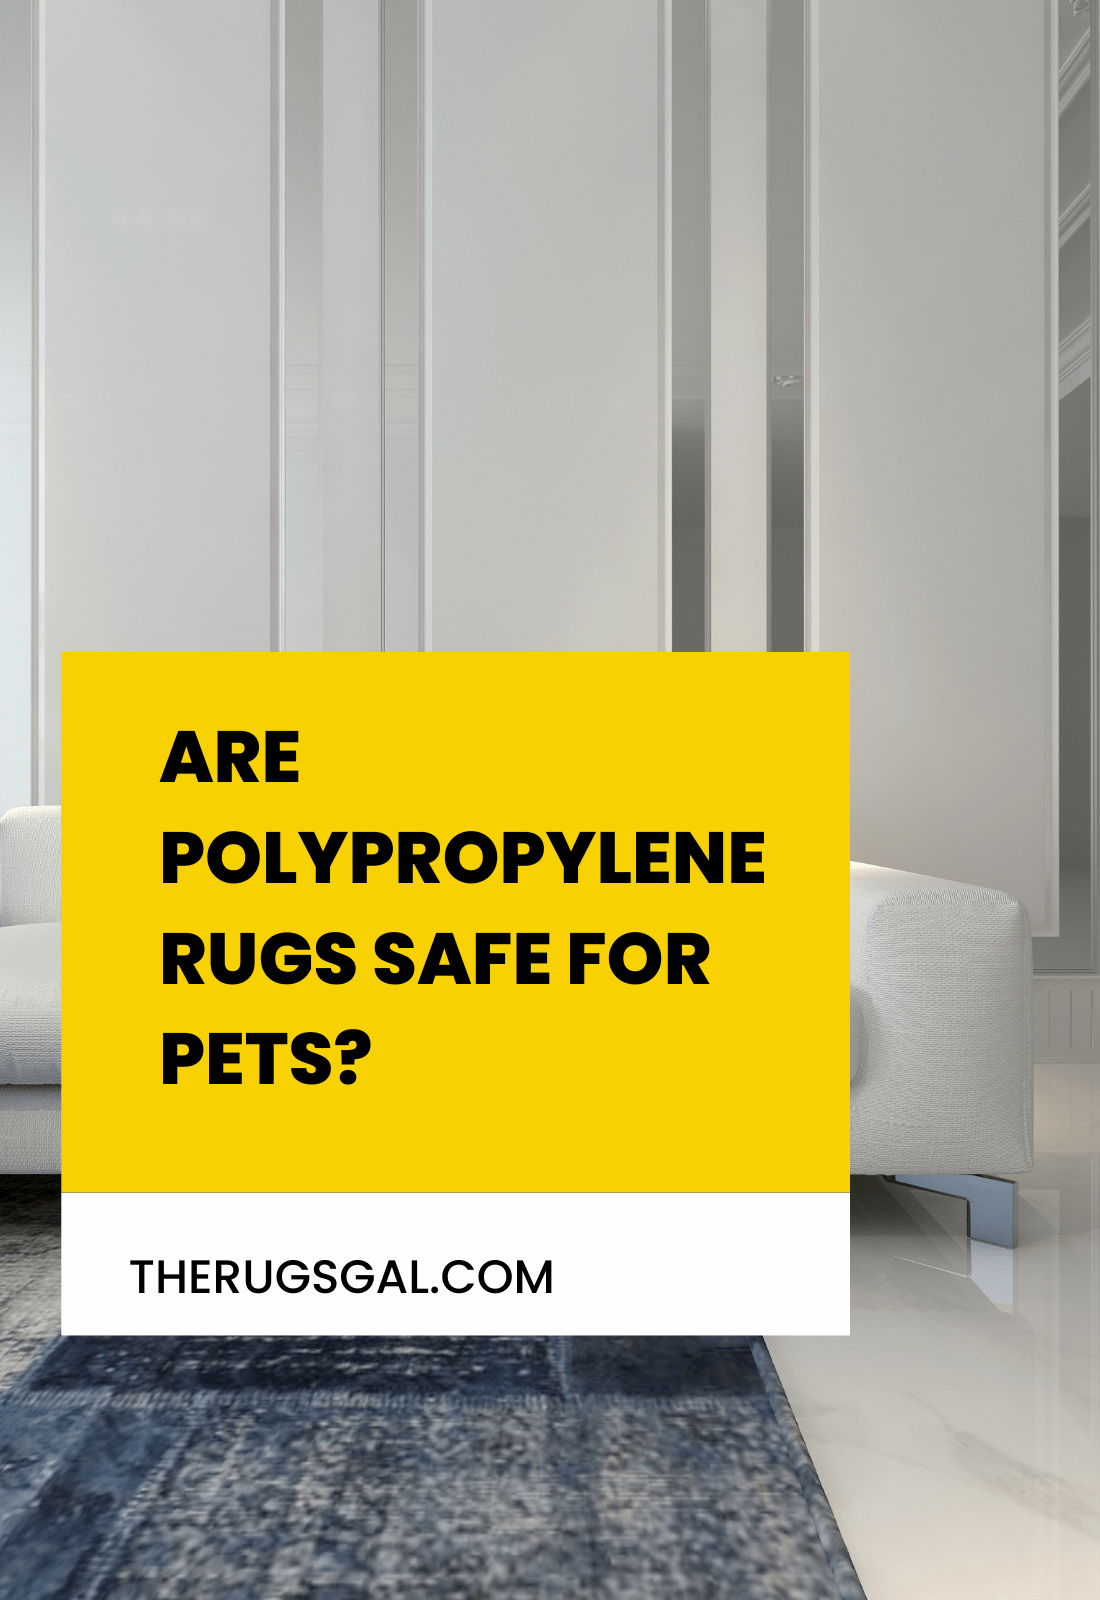 Are Polypropylene Rugs Safe for Pets?